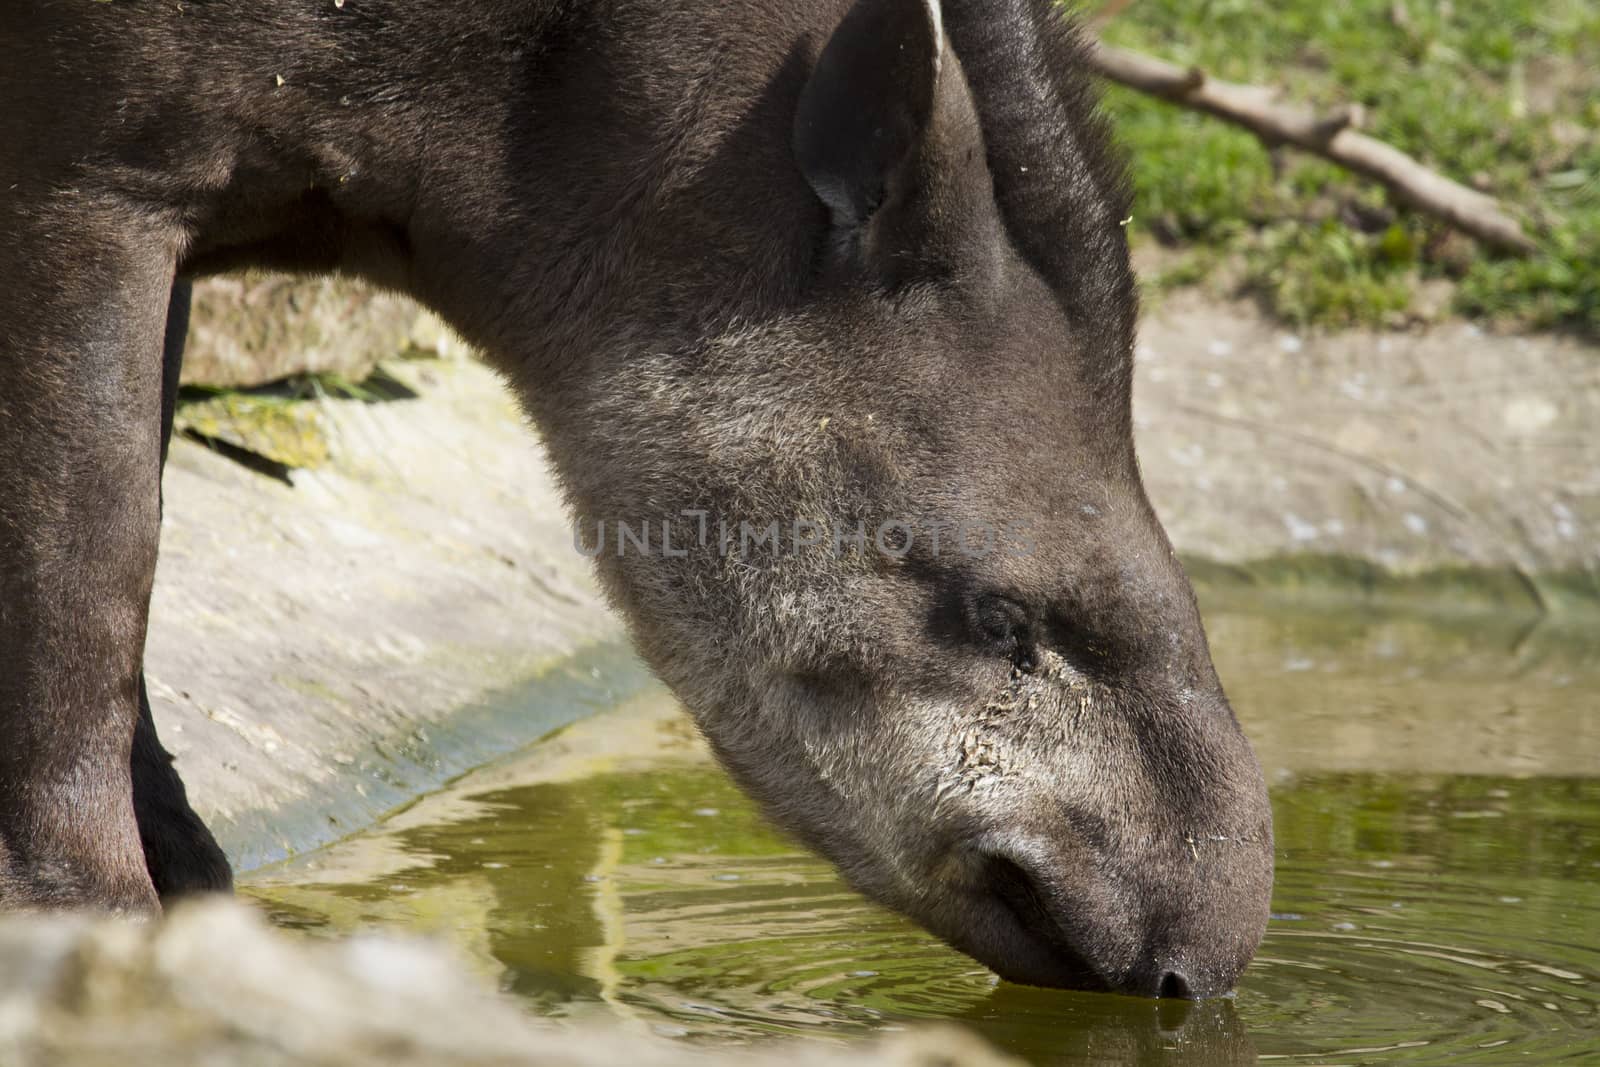 Tapir from south Africa found in Brazil